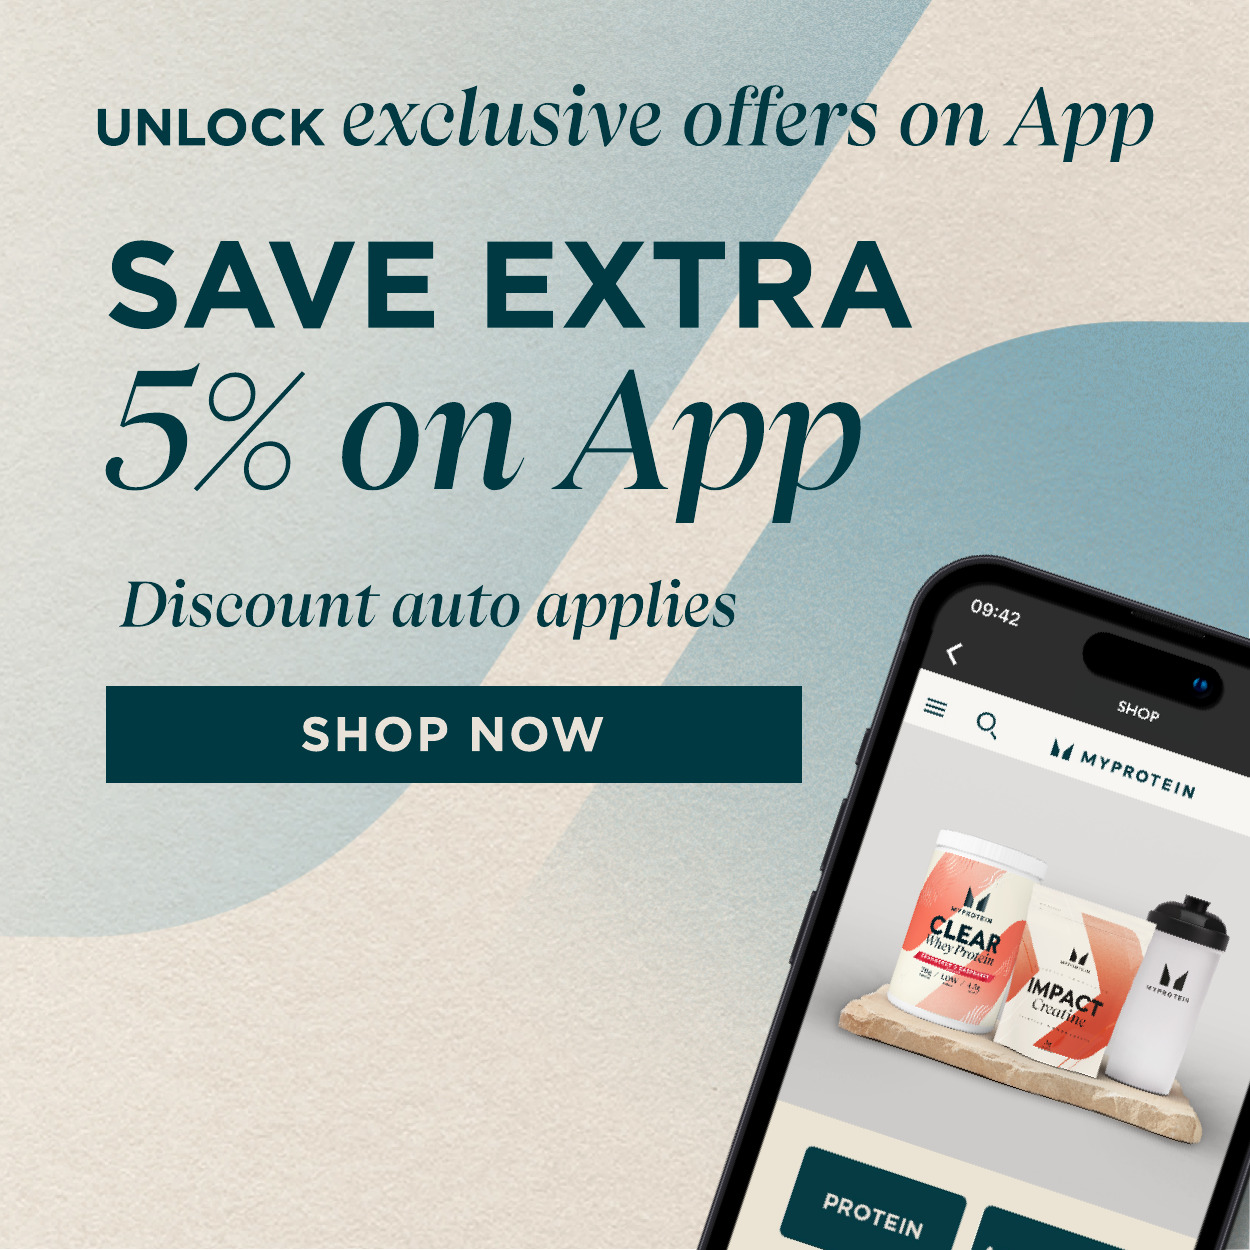 50% off almost everything + 5% extra on app